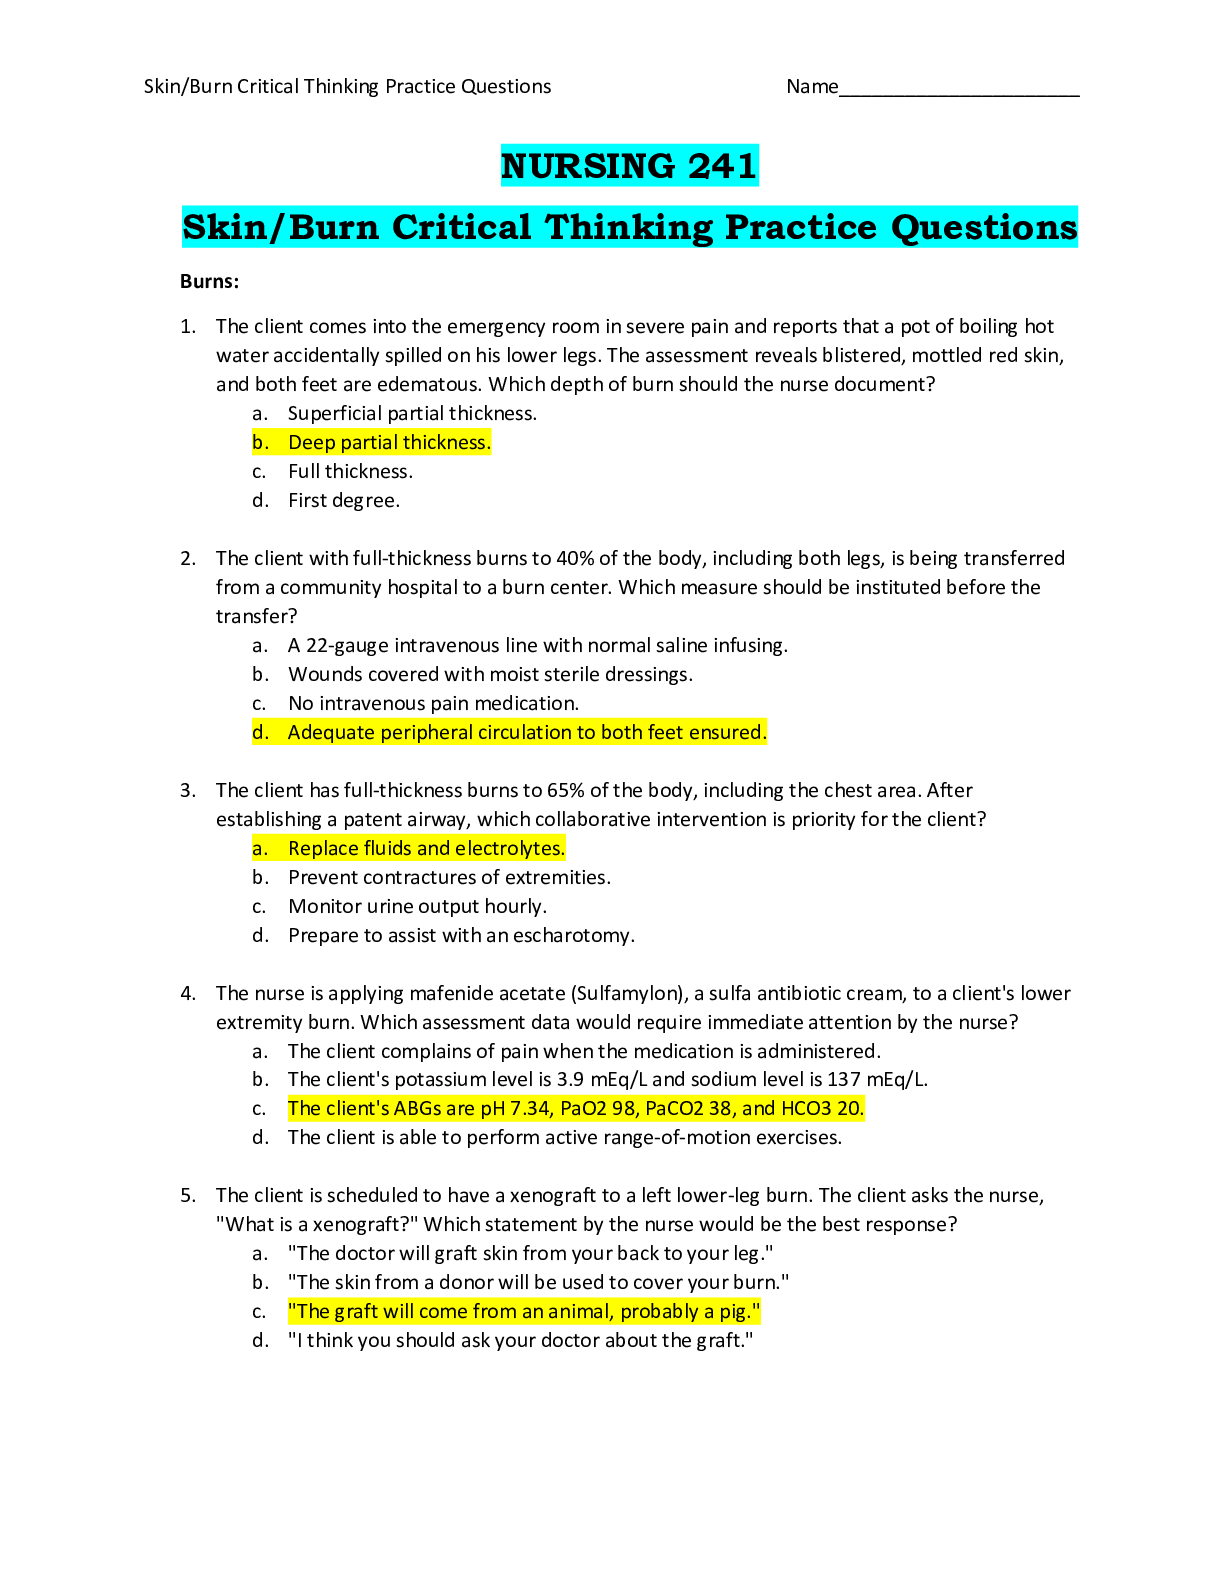 nursing critical thinking practice questions